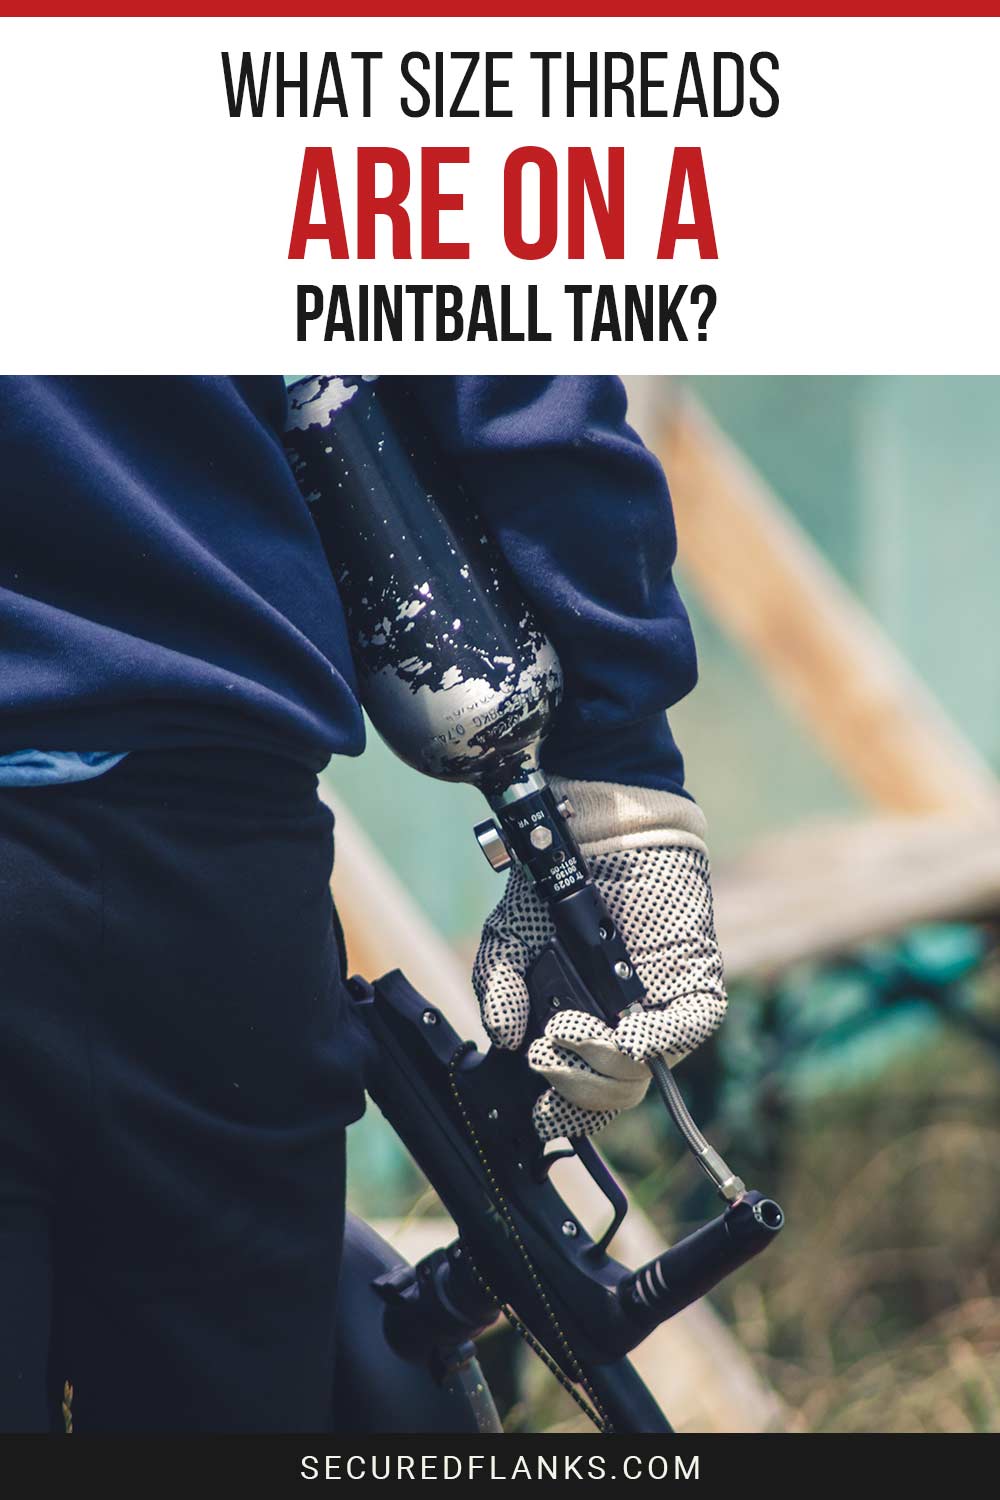 A paintball gun with a tank attached to it in a person's hand - What Size Threads Are On a Paintball Tank?